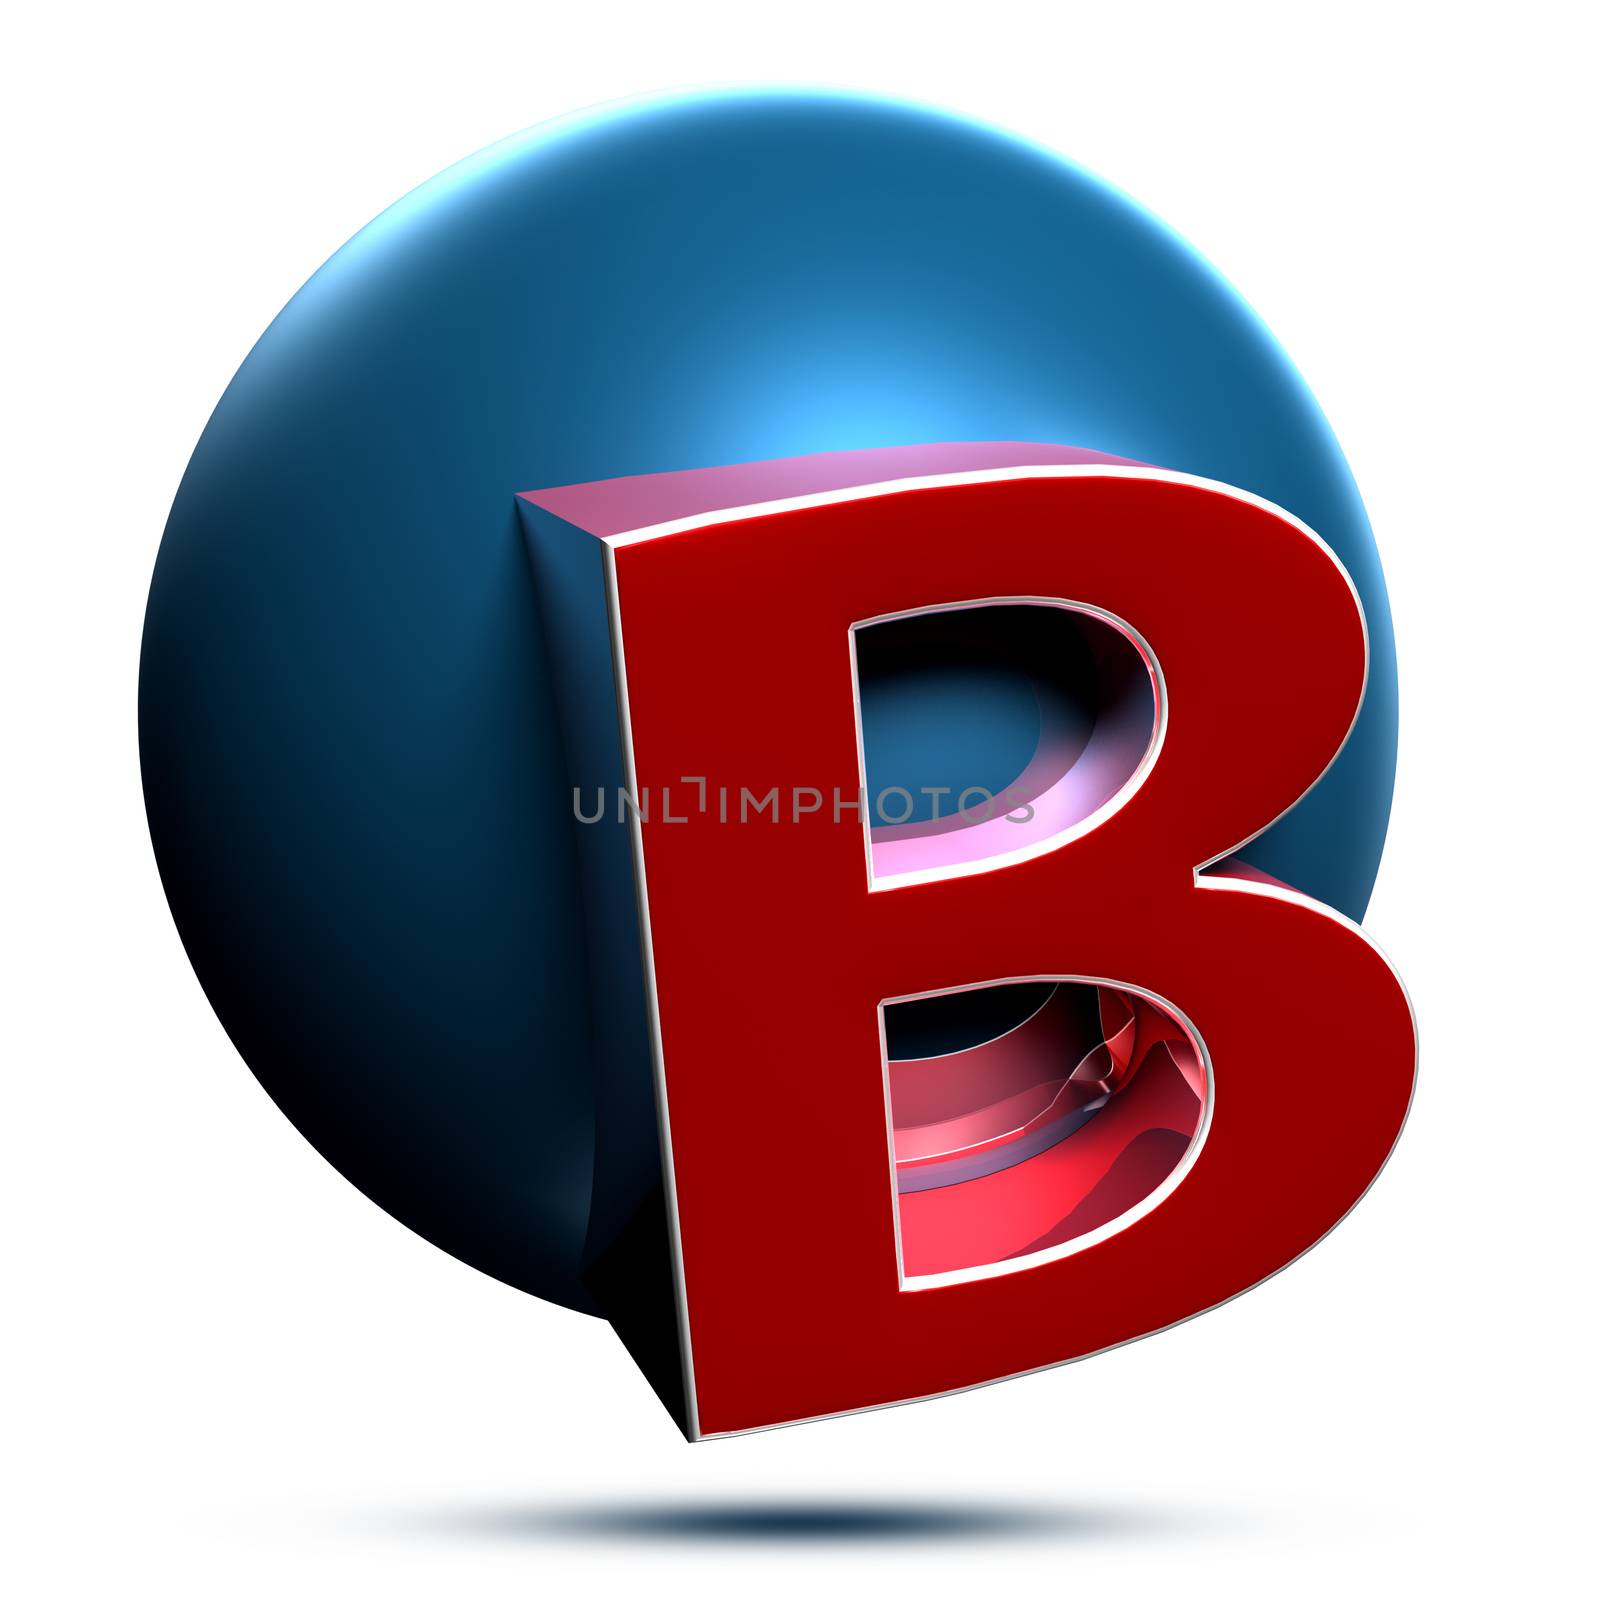 B logo isolated on white background illustration 3D rendering with clipping path.